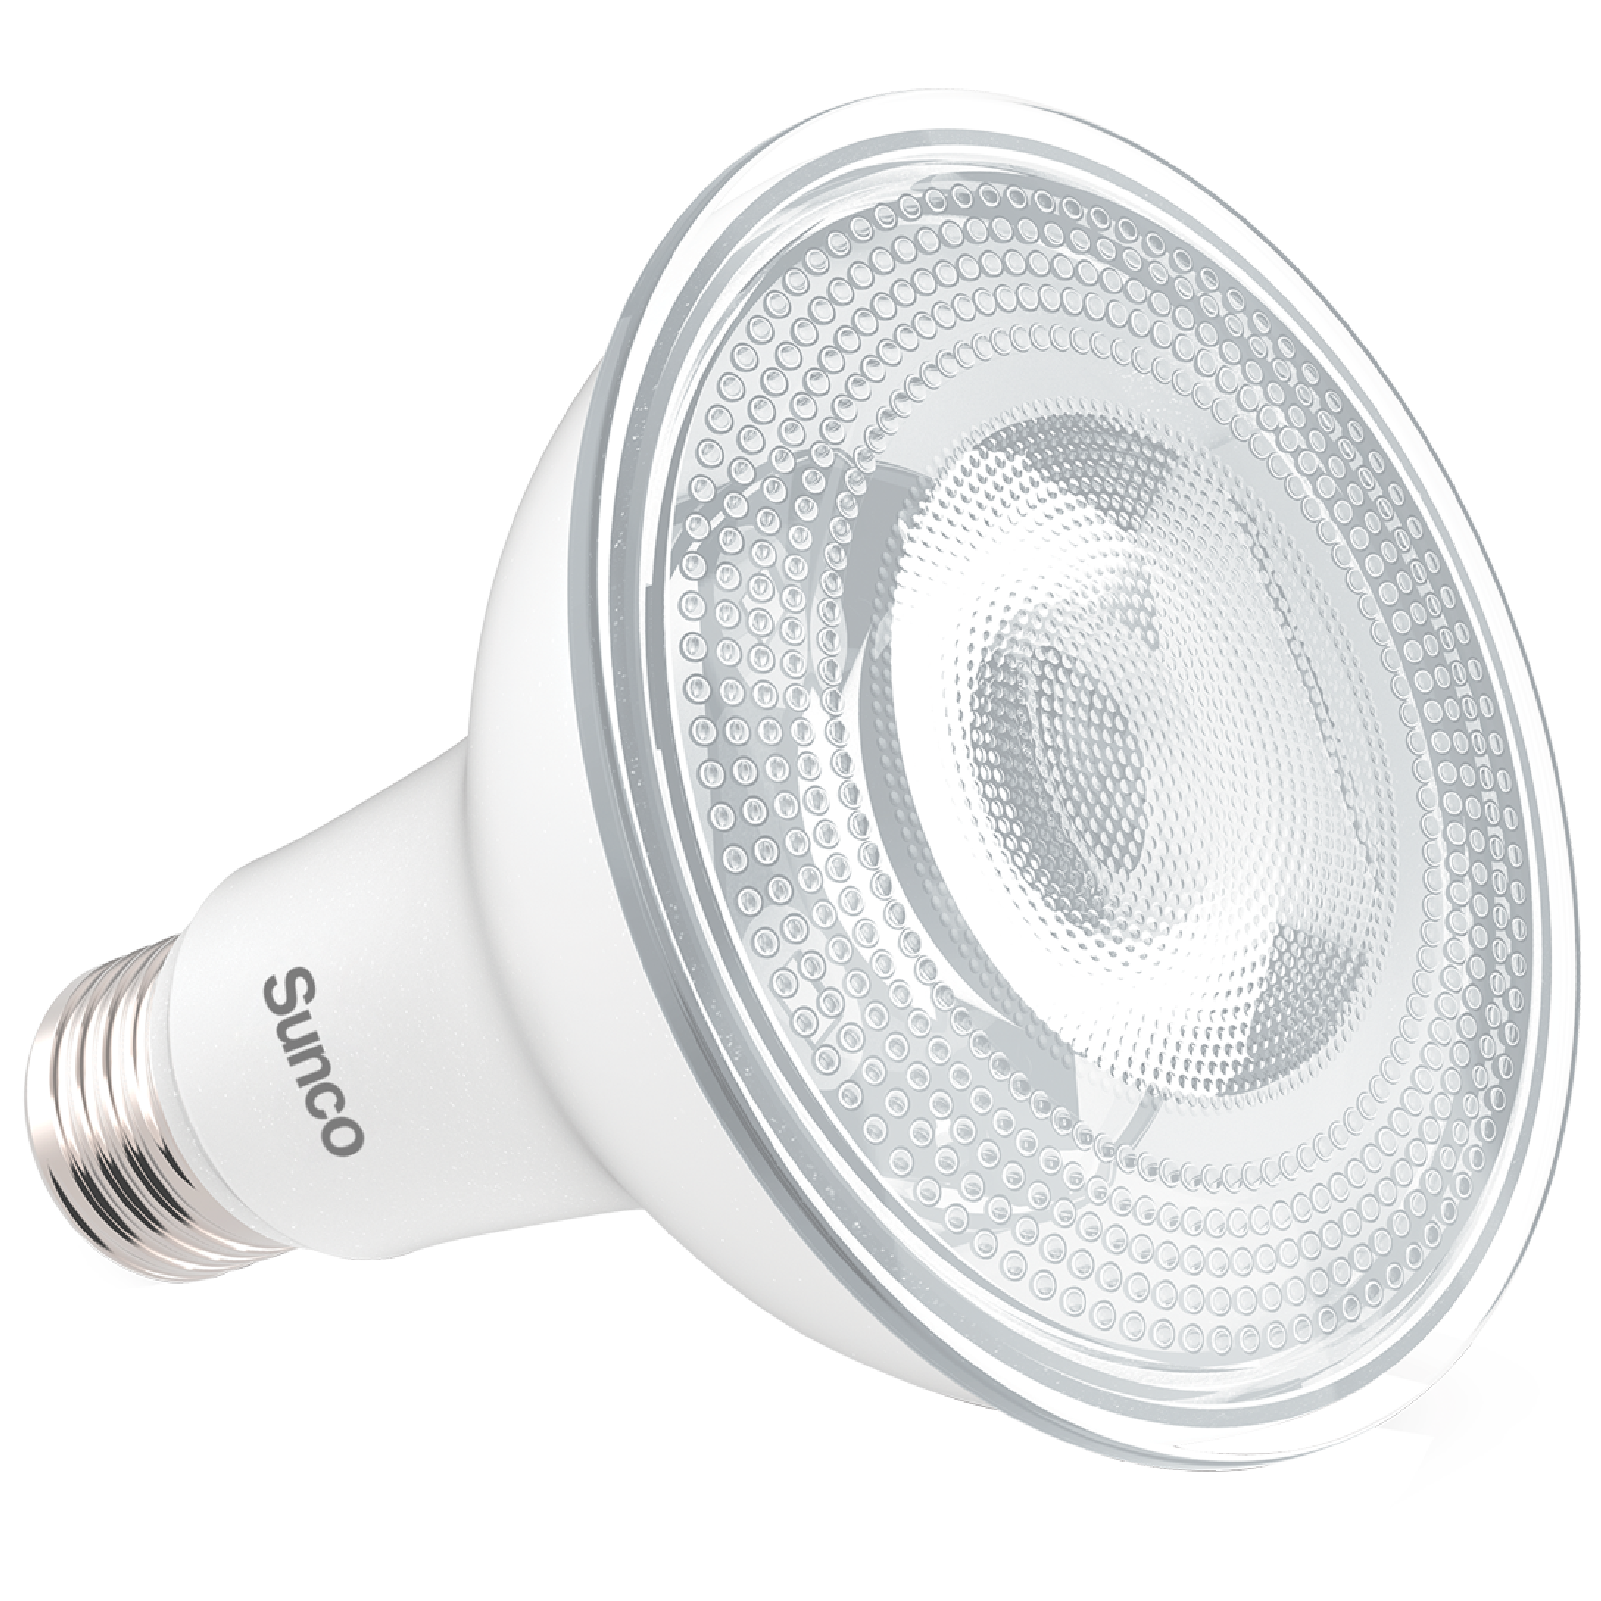 Optimal brightness is the way to go. PAR30 Light Bulbs feature long-lasting LEDs that use less power.